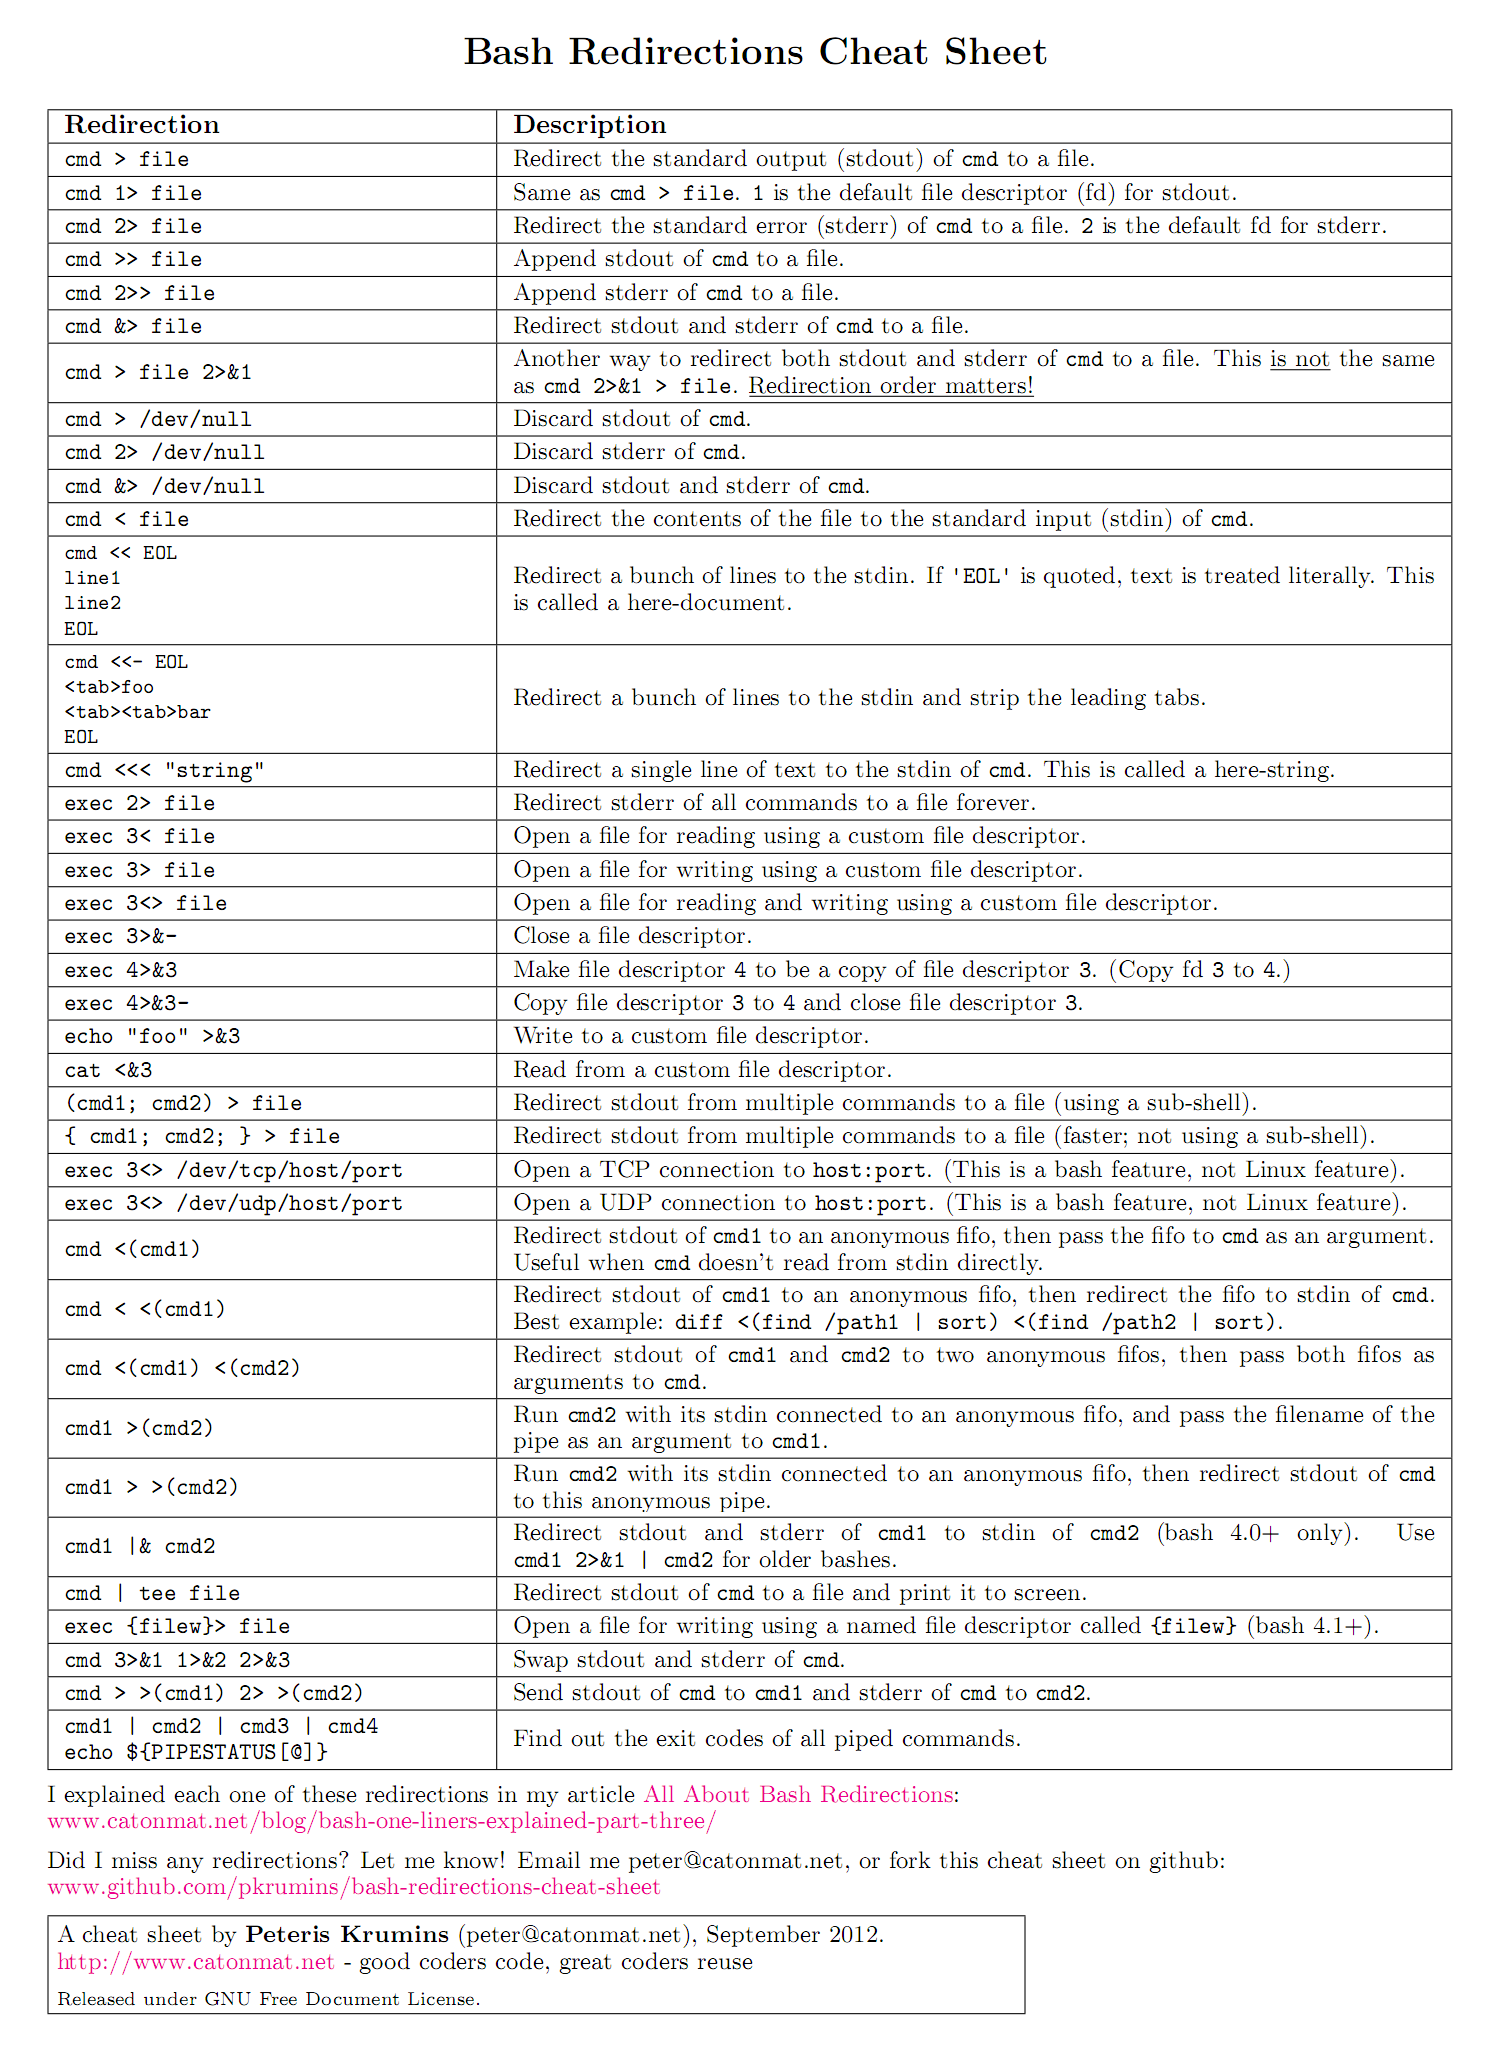 bash-redirections-cheat-sheet.png